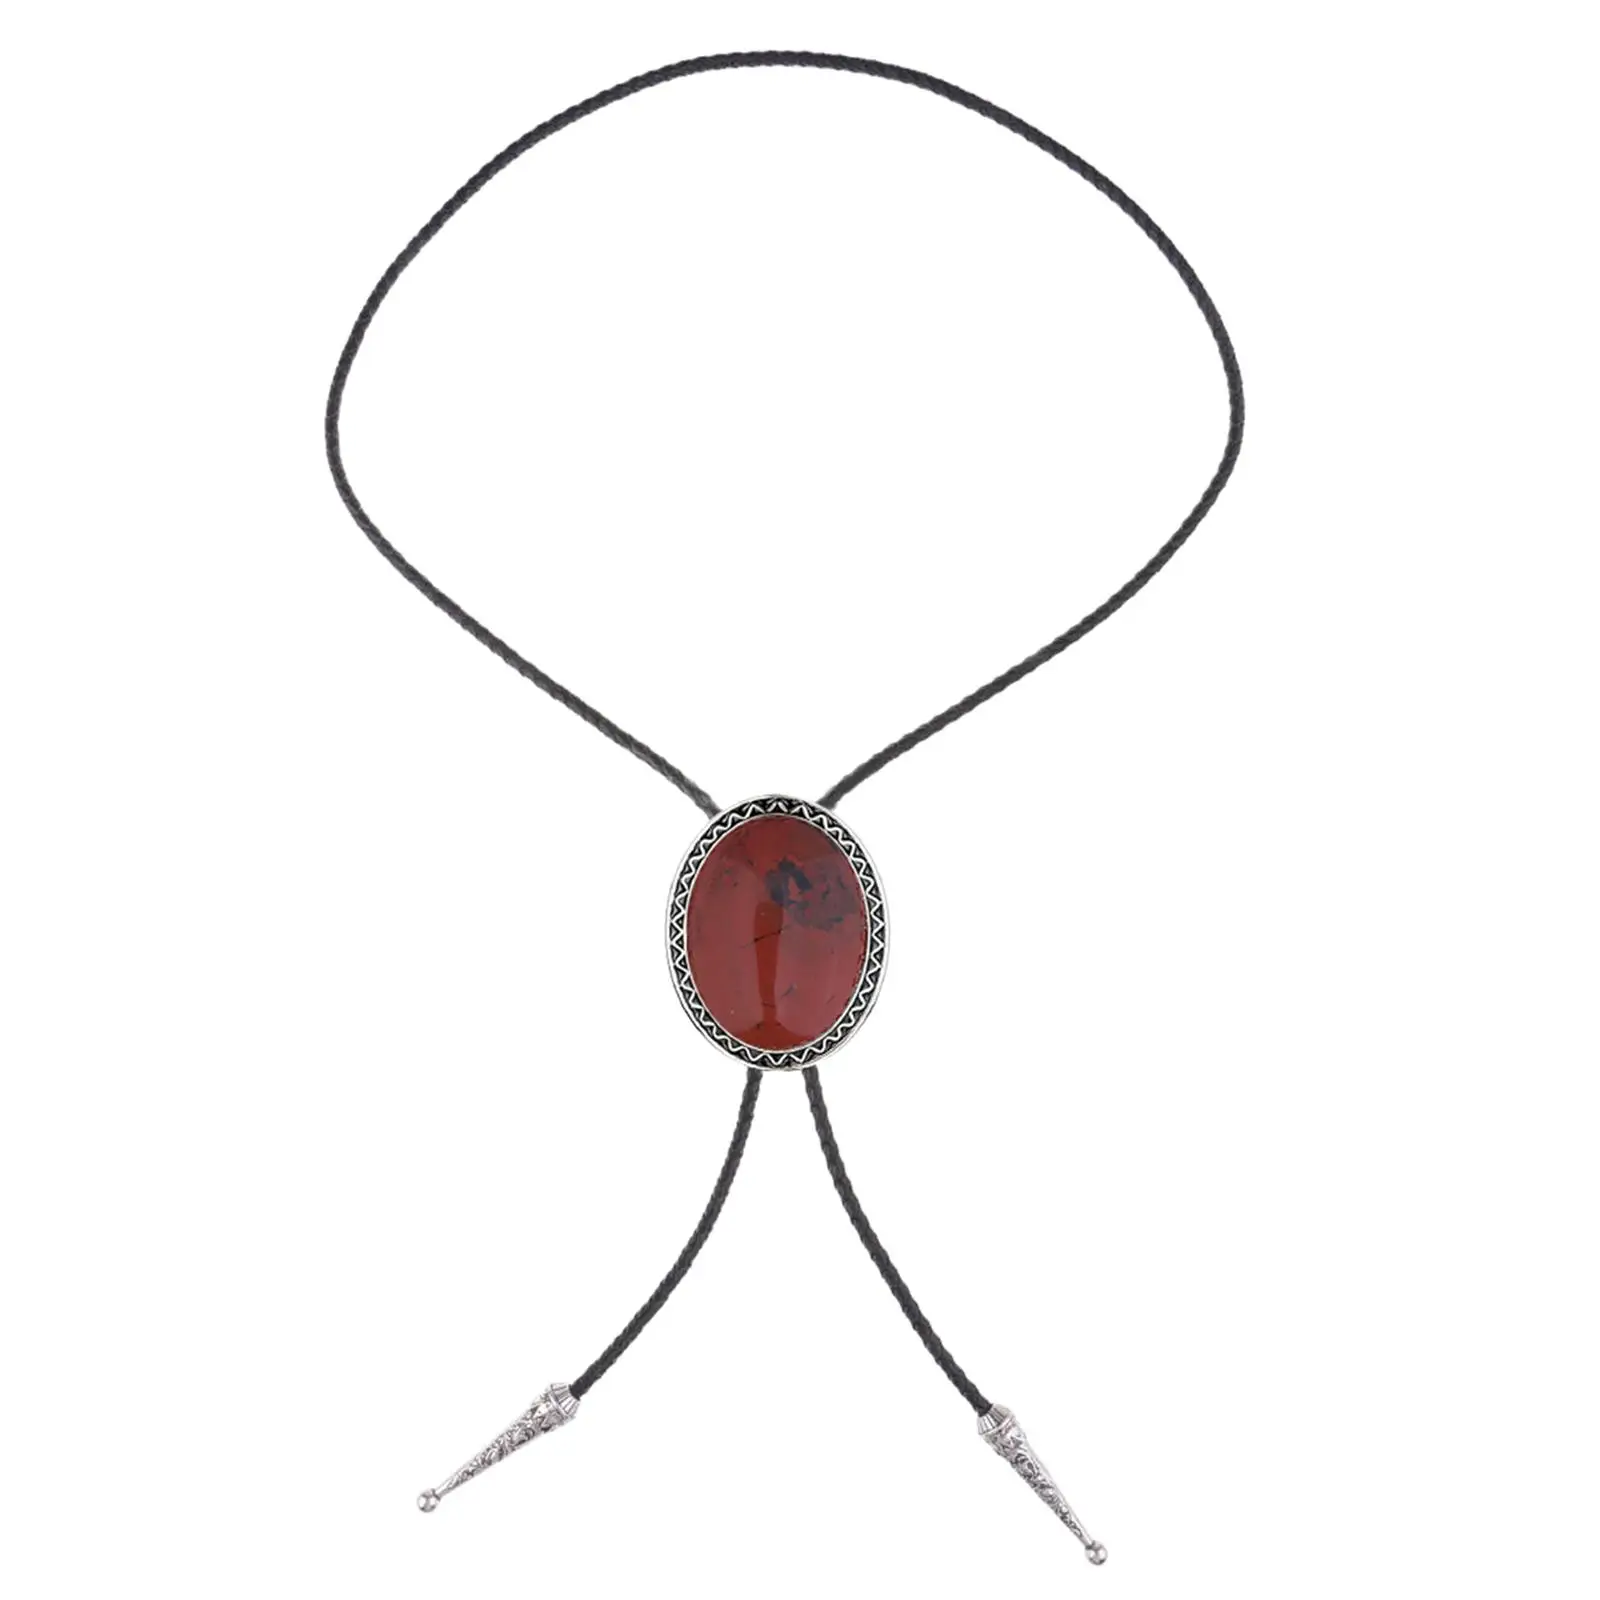 Cowboy Bolo Tie American Style Pendant Stylish Chain Vintage Style Fashion Necktie for Graduation Anniversary Prom Party Banquet